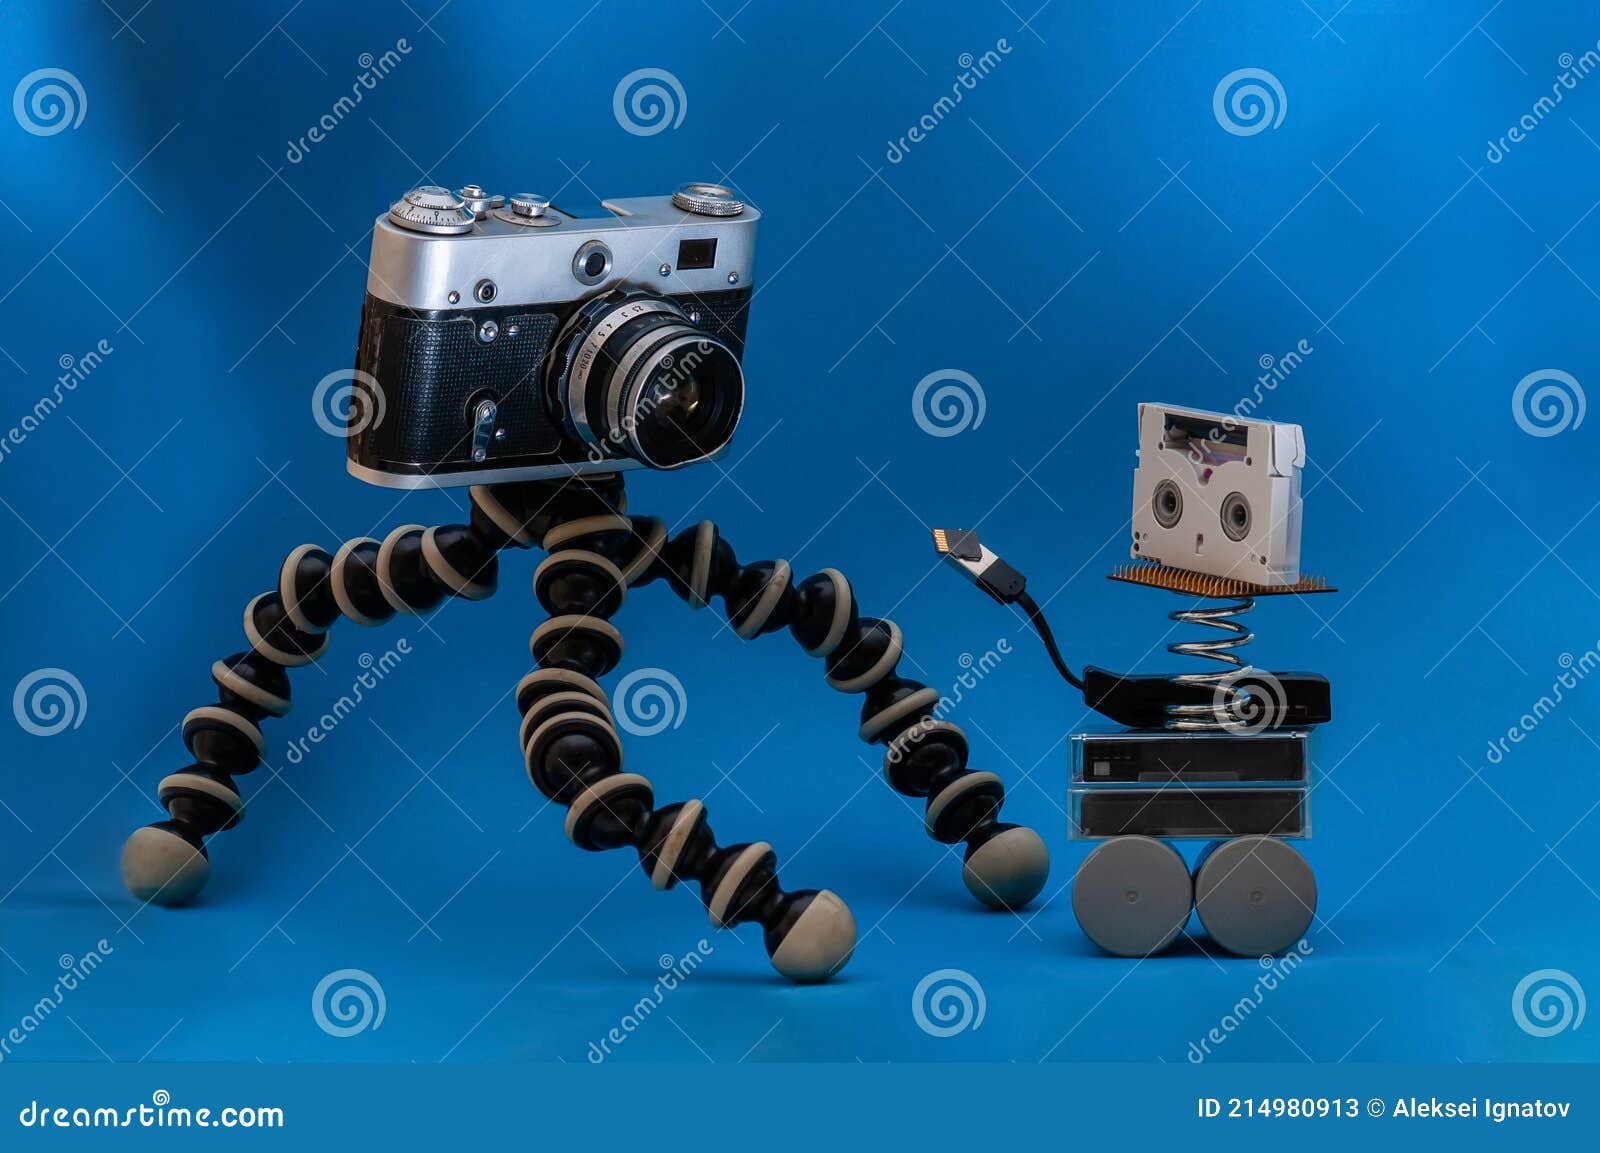 Vintage Film Camera and Video Cassettes on a Blue Background. Card